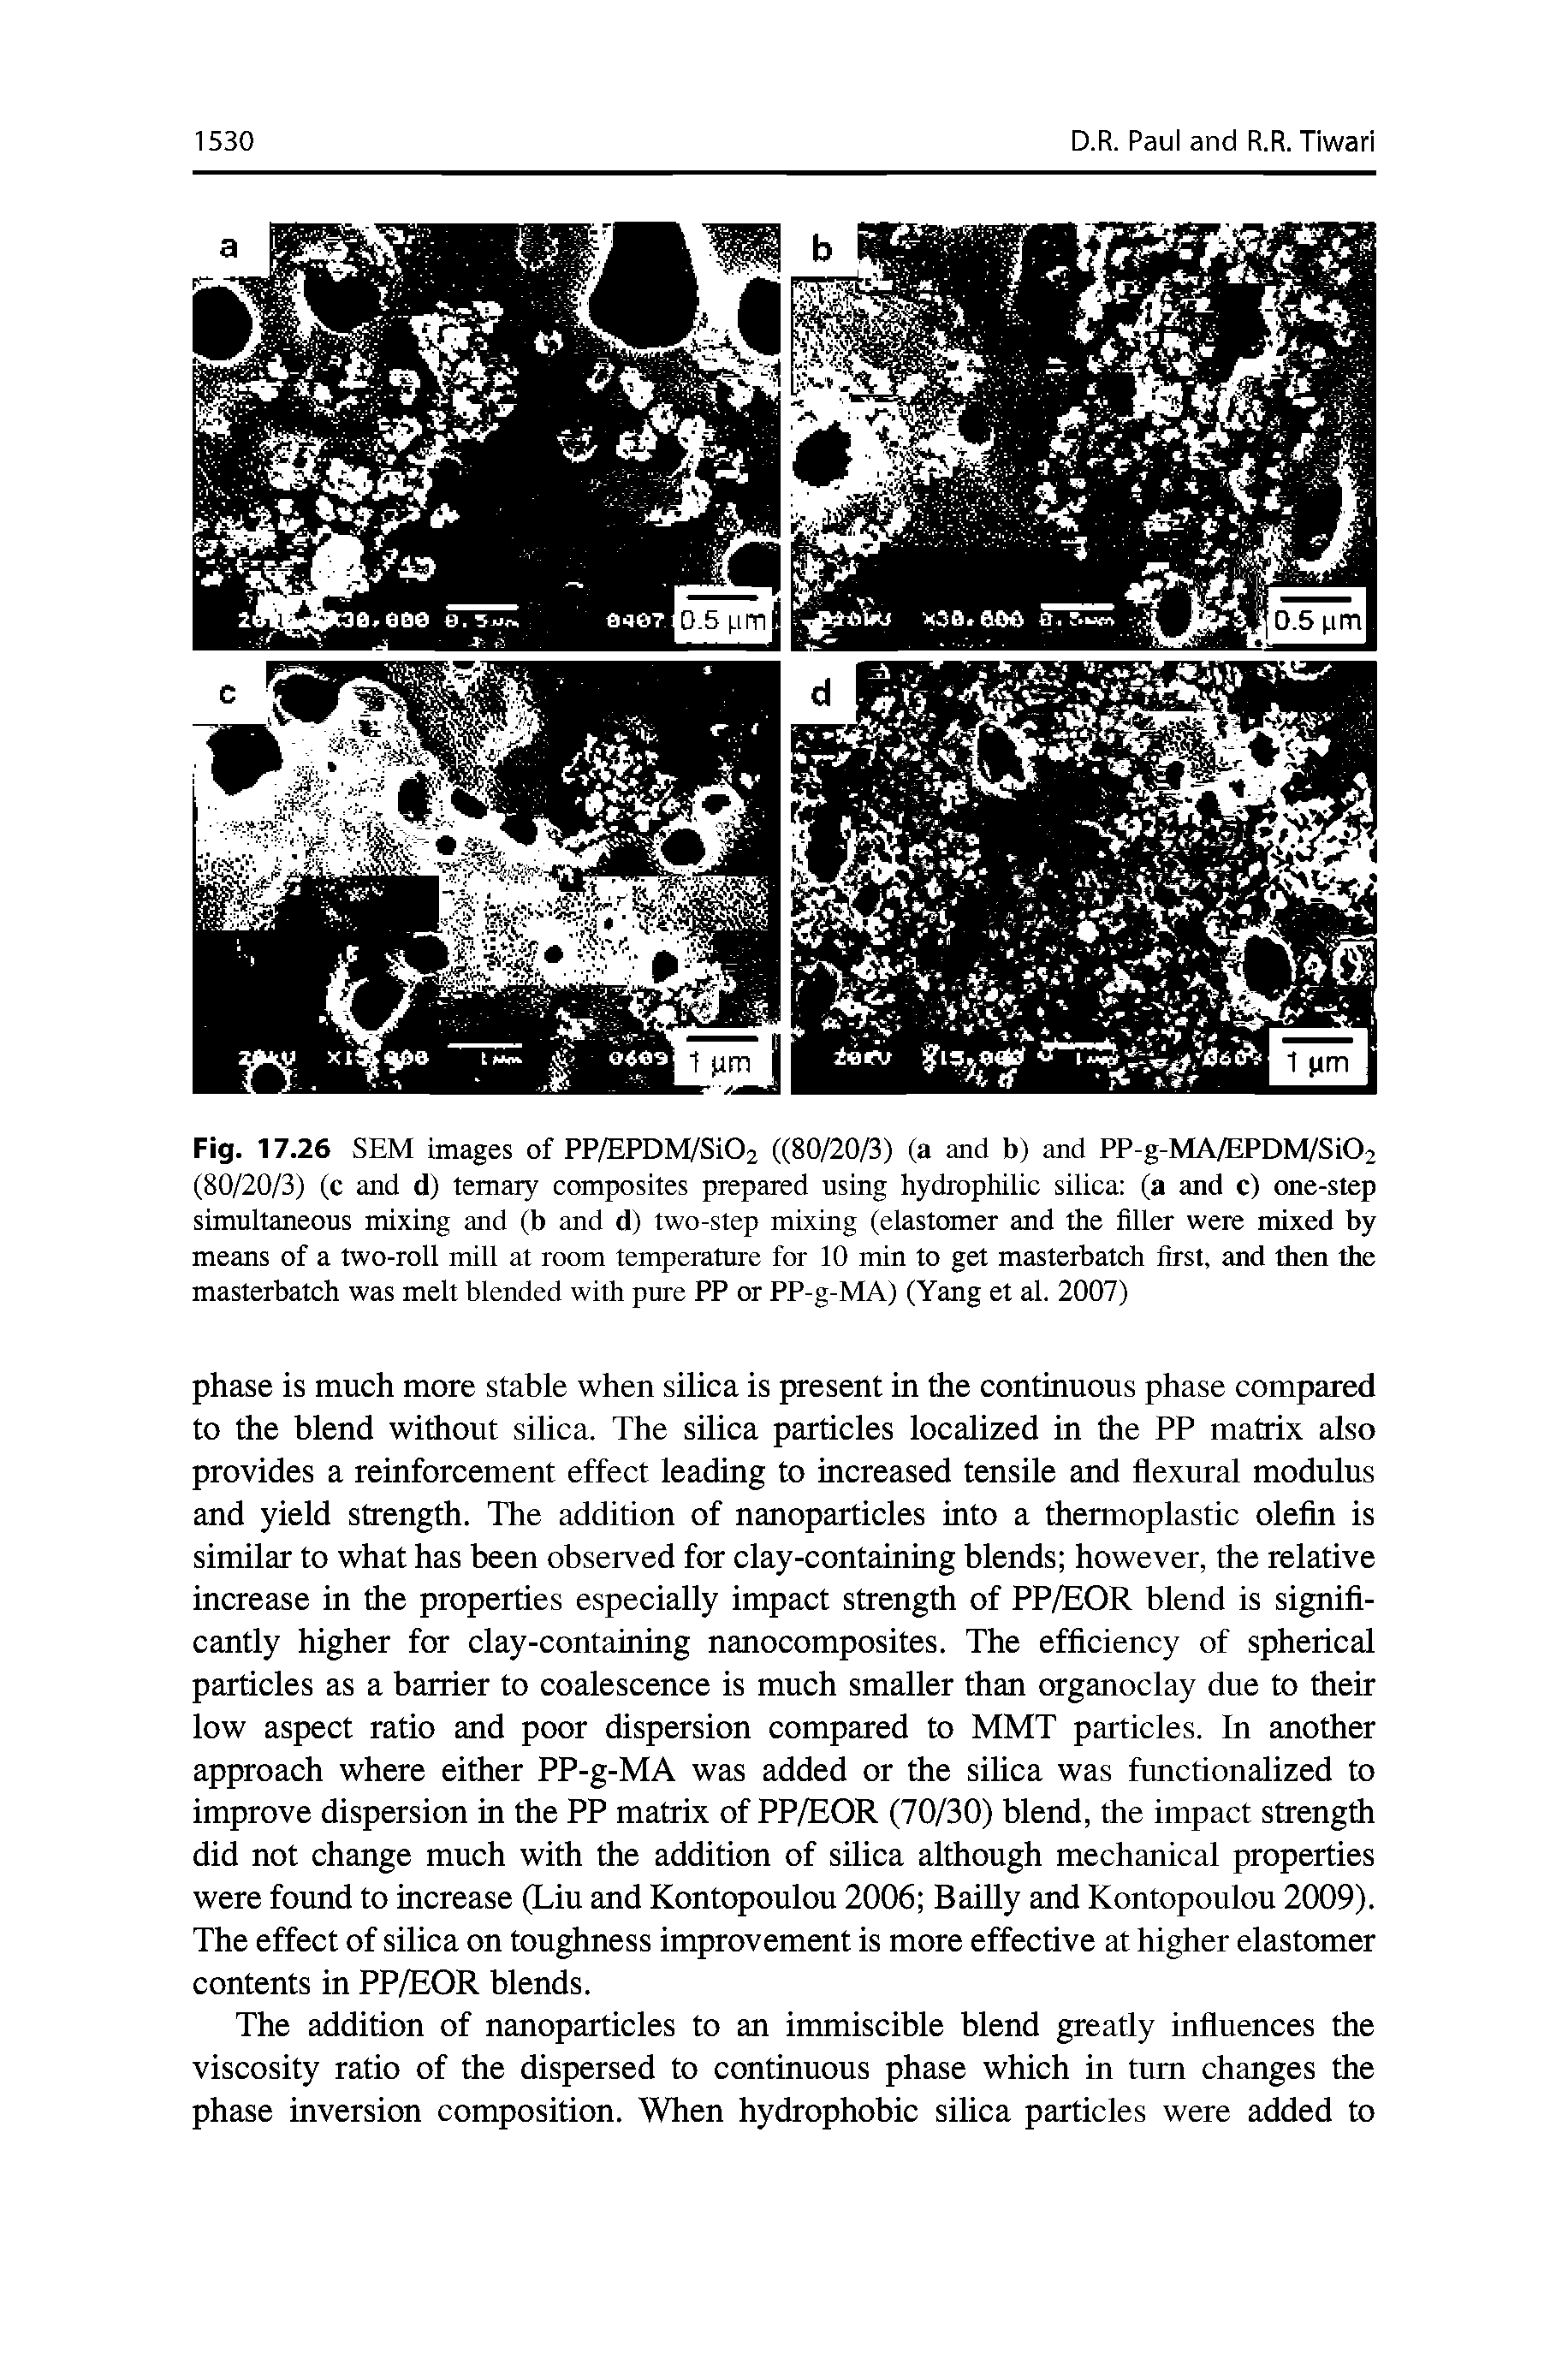 Fig. 17.26 SEM images of PP/EPDM/Si02 ((80/20/3) (a and b) and PP-g-MA/EPDM/Si02 (80/20/3) (c and d) ternary composites prepared using hydrophilic silica (a and c) one-step simultaneous mixing and (b and d) two-step mixing (elastomer and the filler were mixed by means of a two-roll mill at room temperature for 10 min to get masterbatch first, and then the masterbatch was melt blended with pure PP or PP-g-MA) (Yang et al. 2007)...